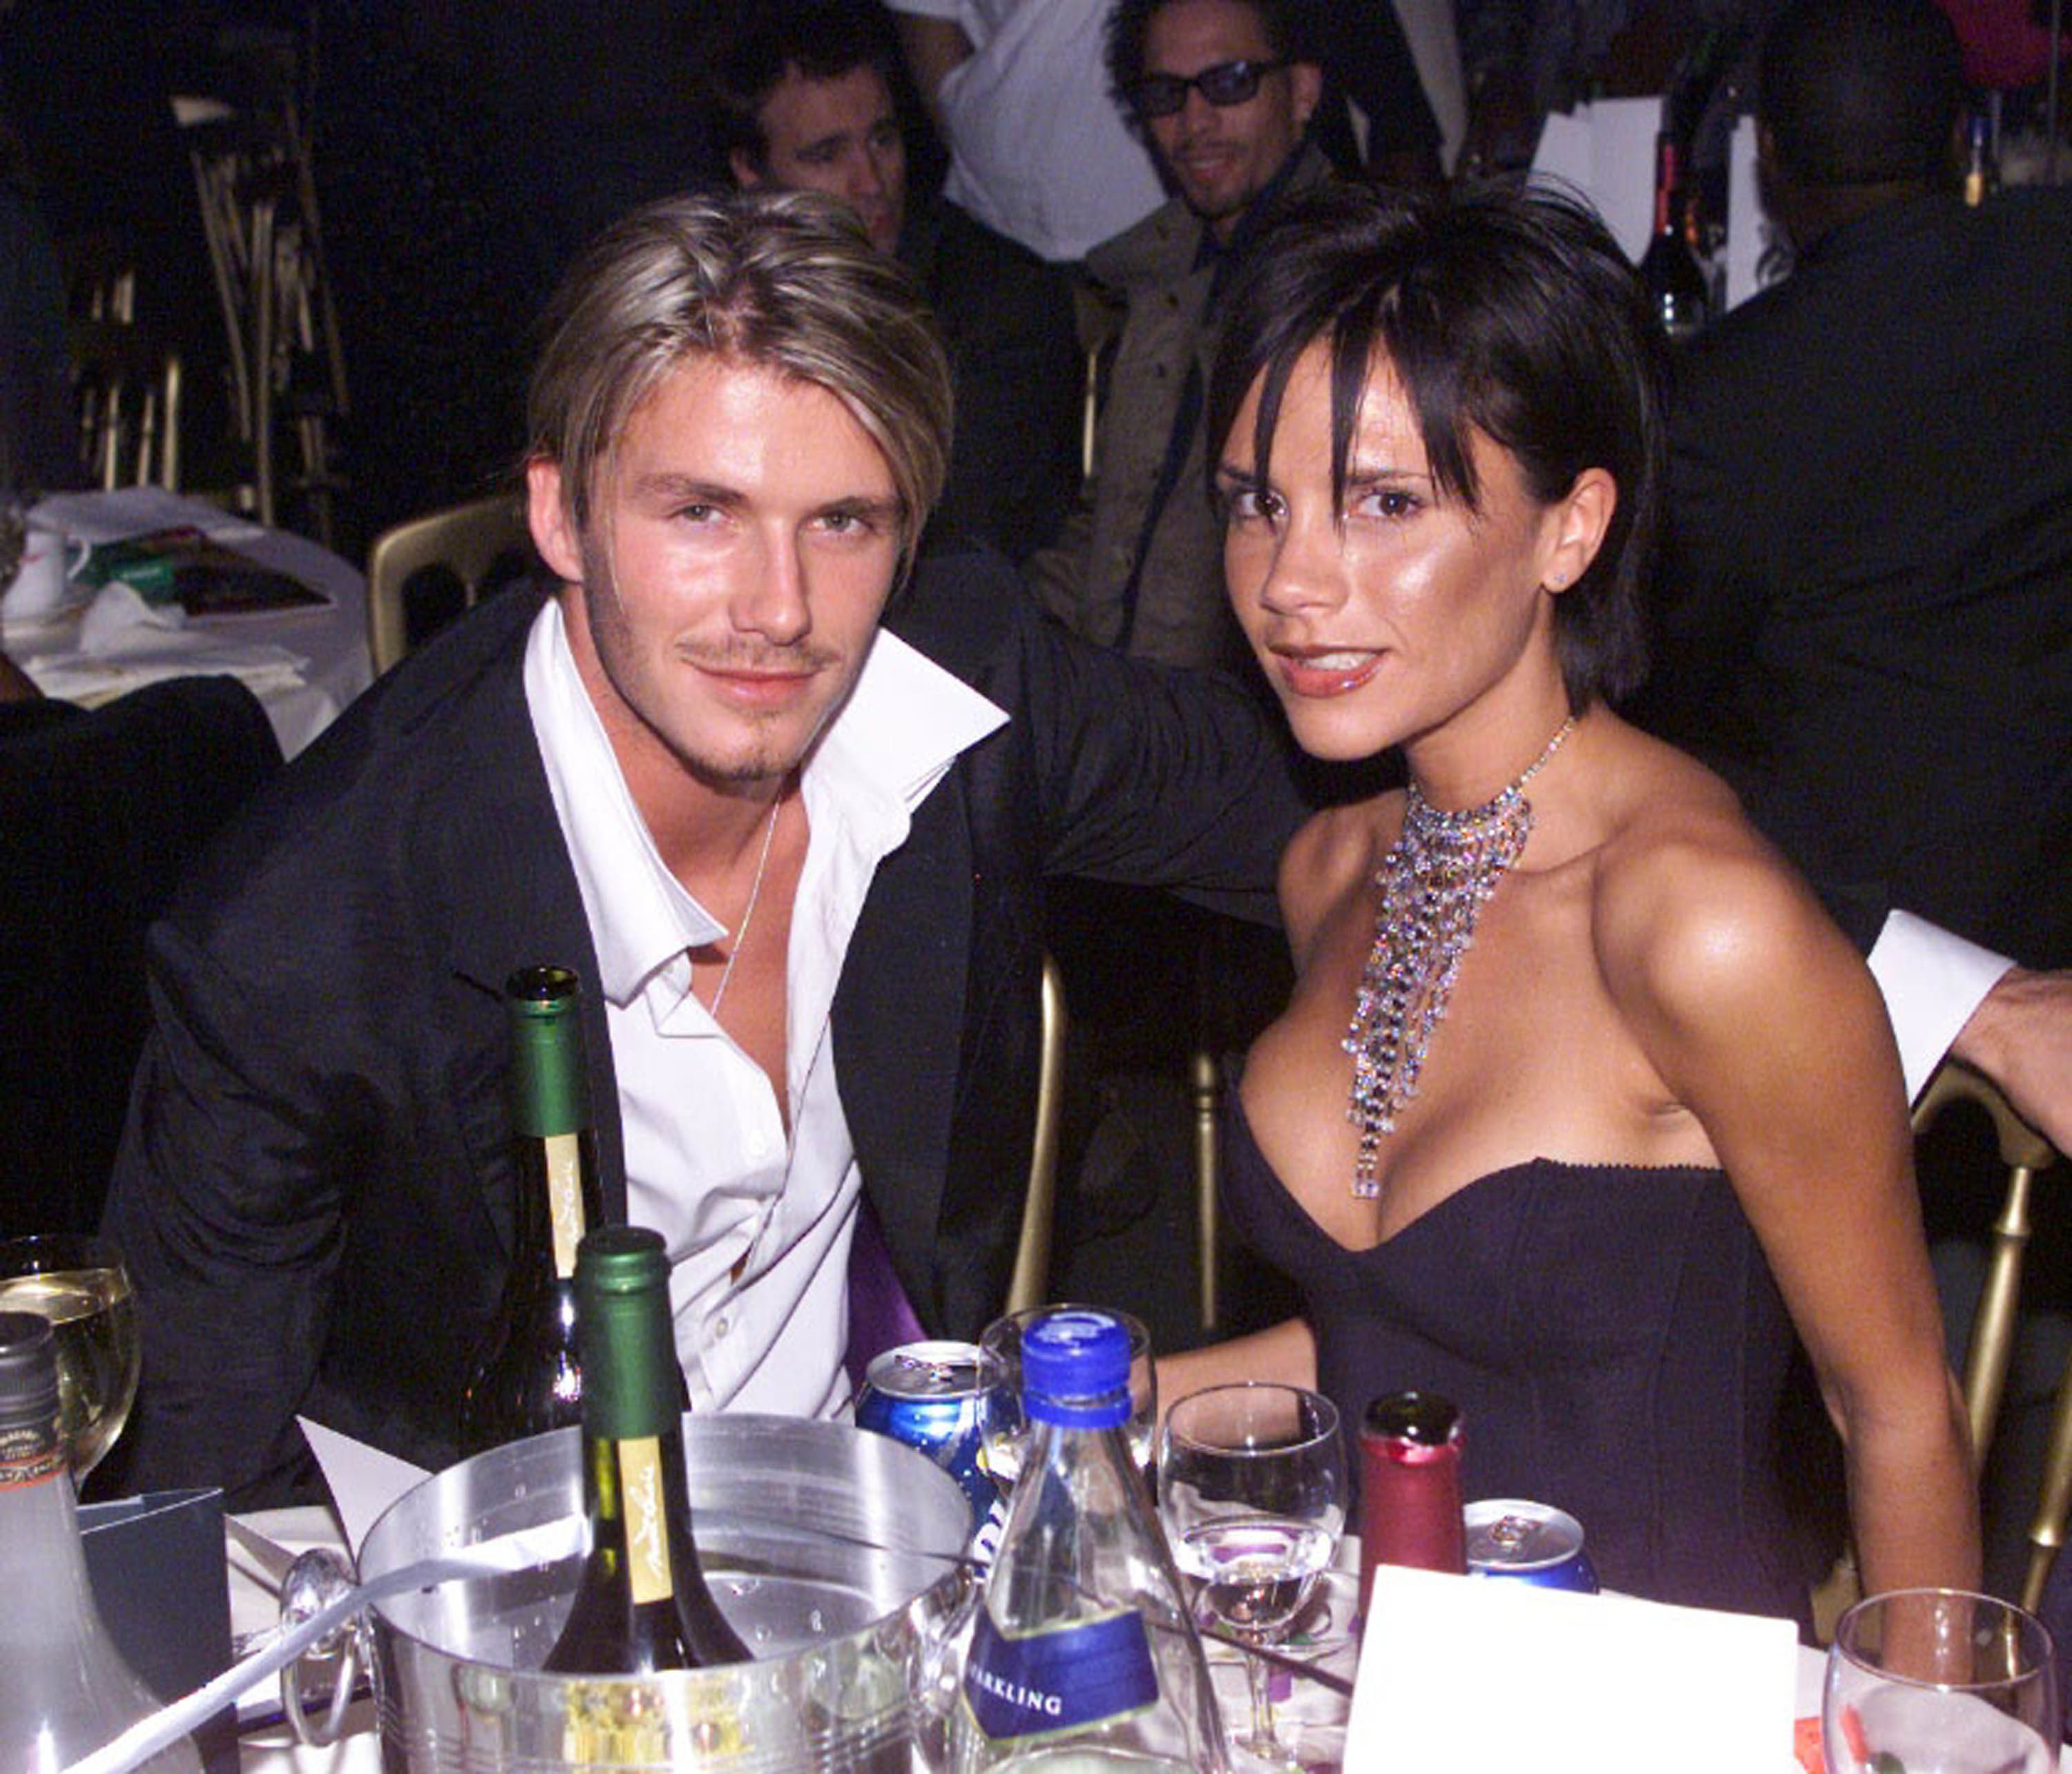 David Beckham and Victoria Beckham sitting at a table, dressed elegantly for an event. David is in a suit, and Victoria is wearing a strapless dress with a statement necklace